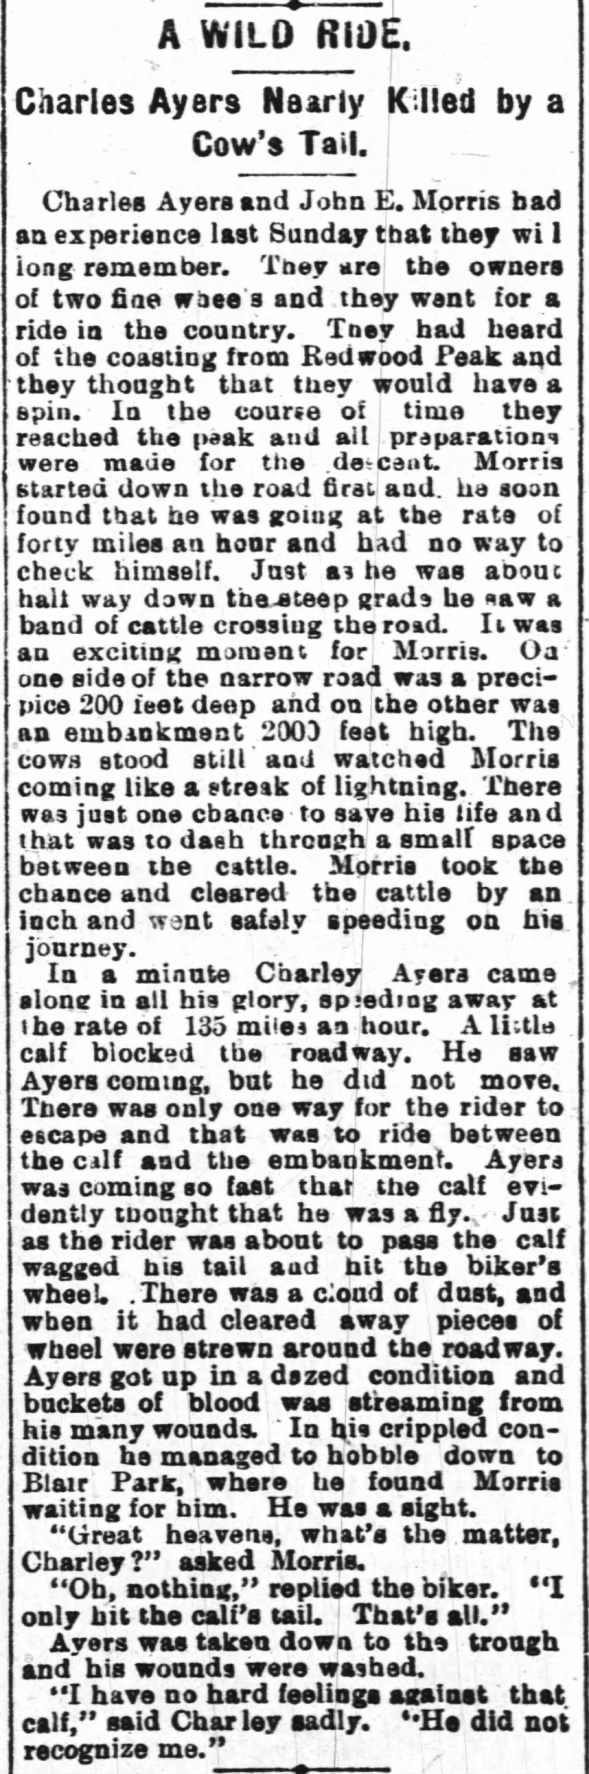 A WILD RIDE
Charles Ayers Nearly Killed by a Cow's Tail.
TO BLOG.